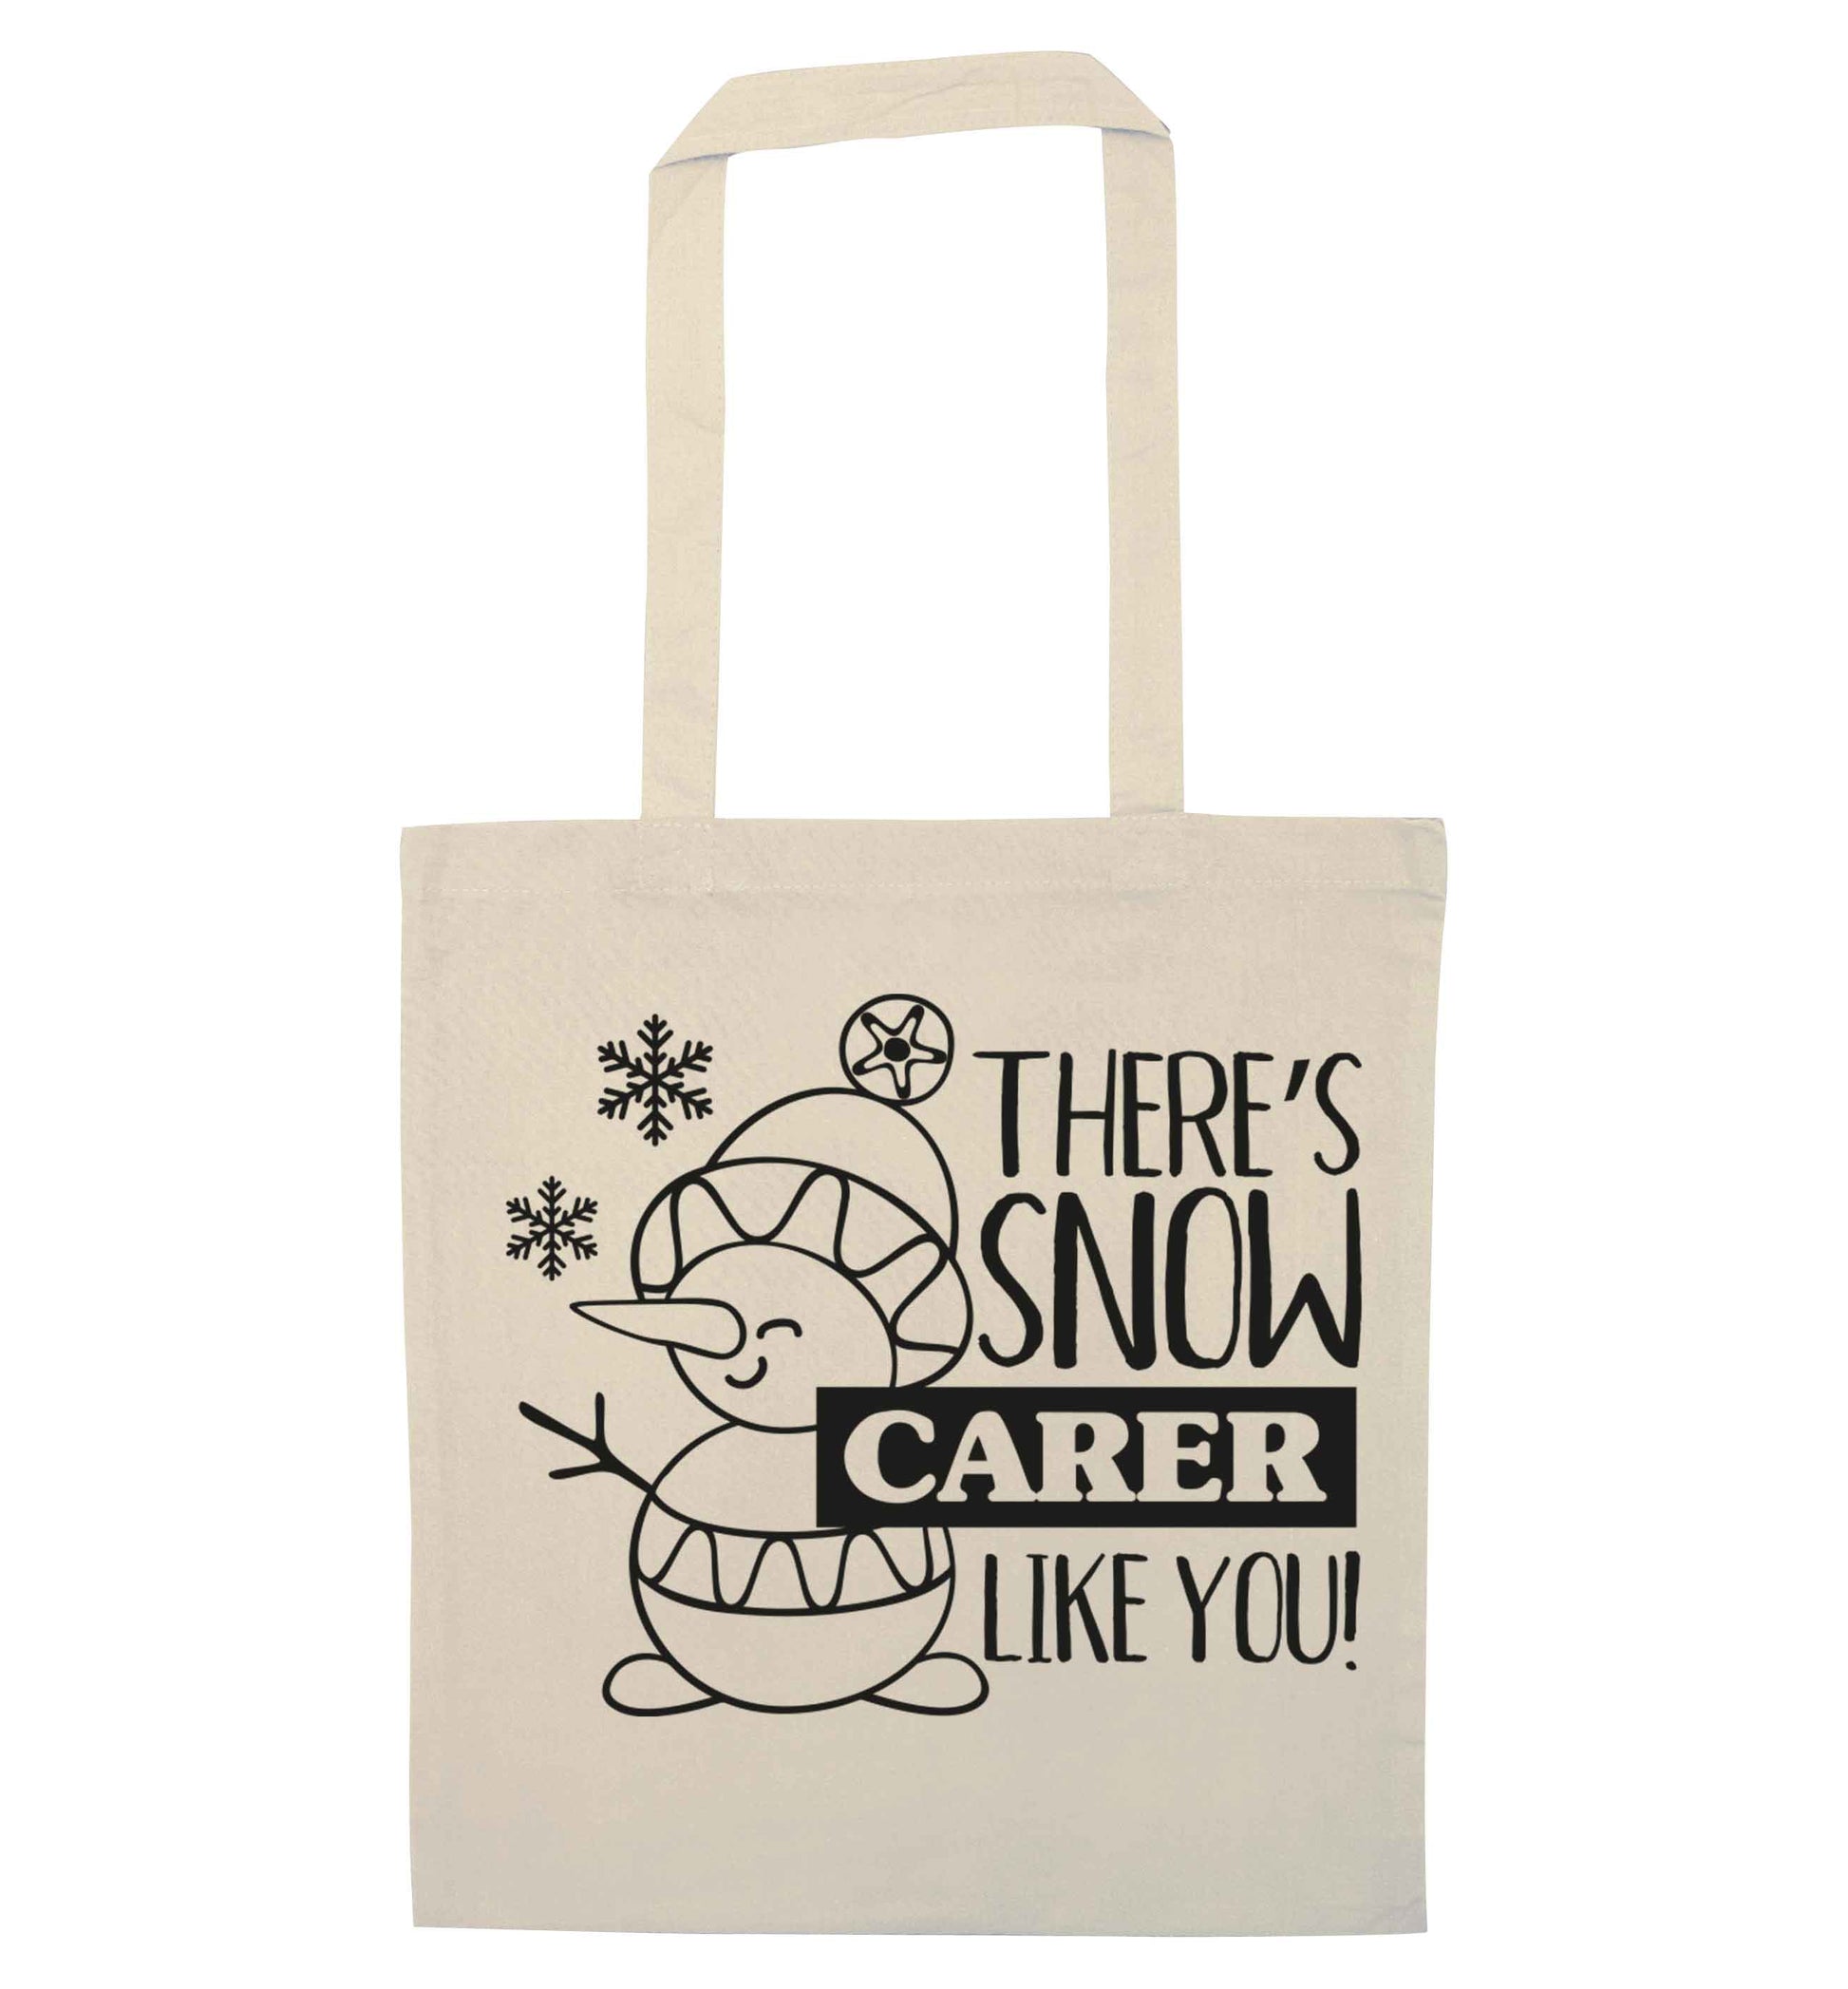 There's snow carer like you natural tote bag